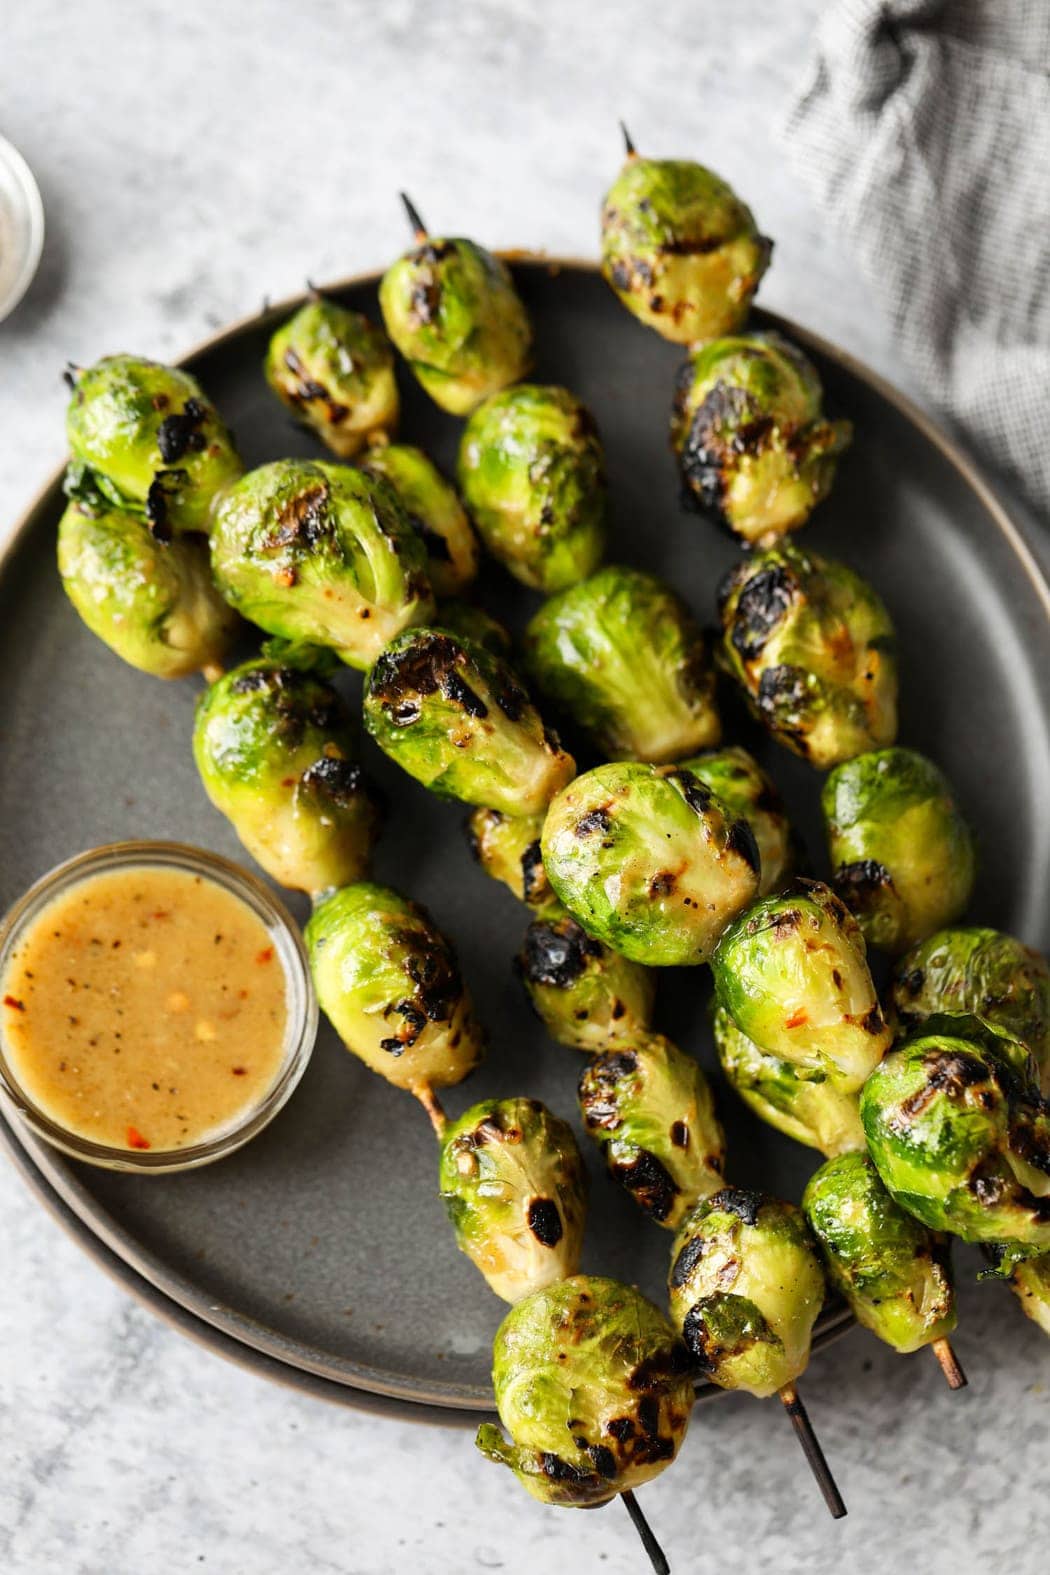 Grilled brussels sprouts on skewers with side of honey mustard sauce.